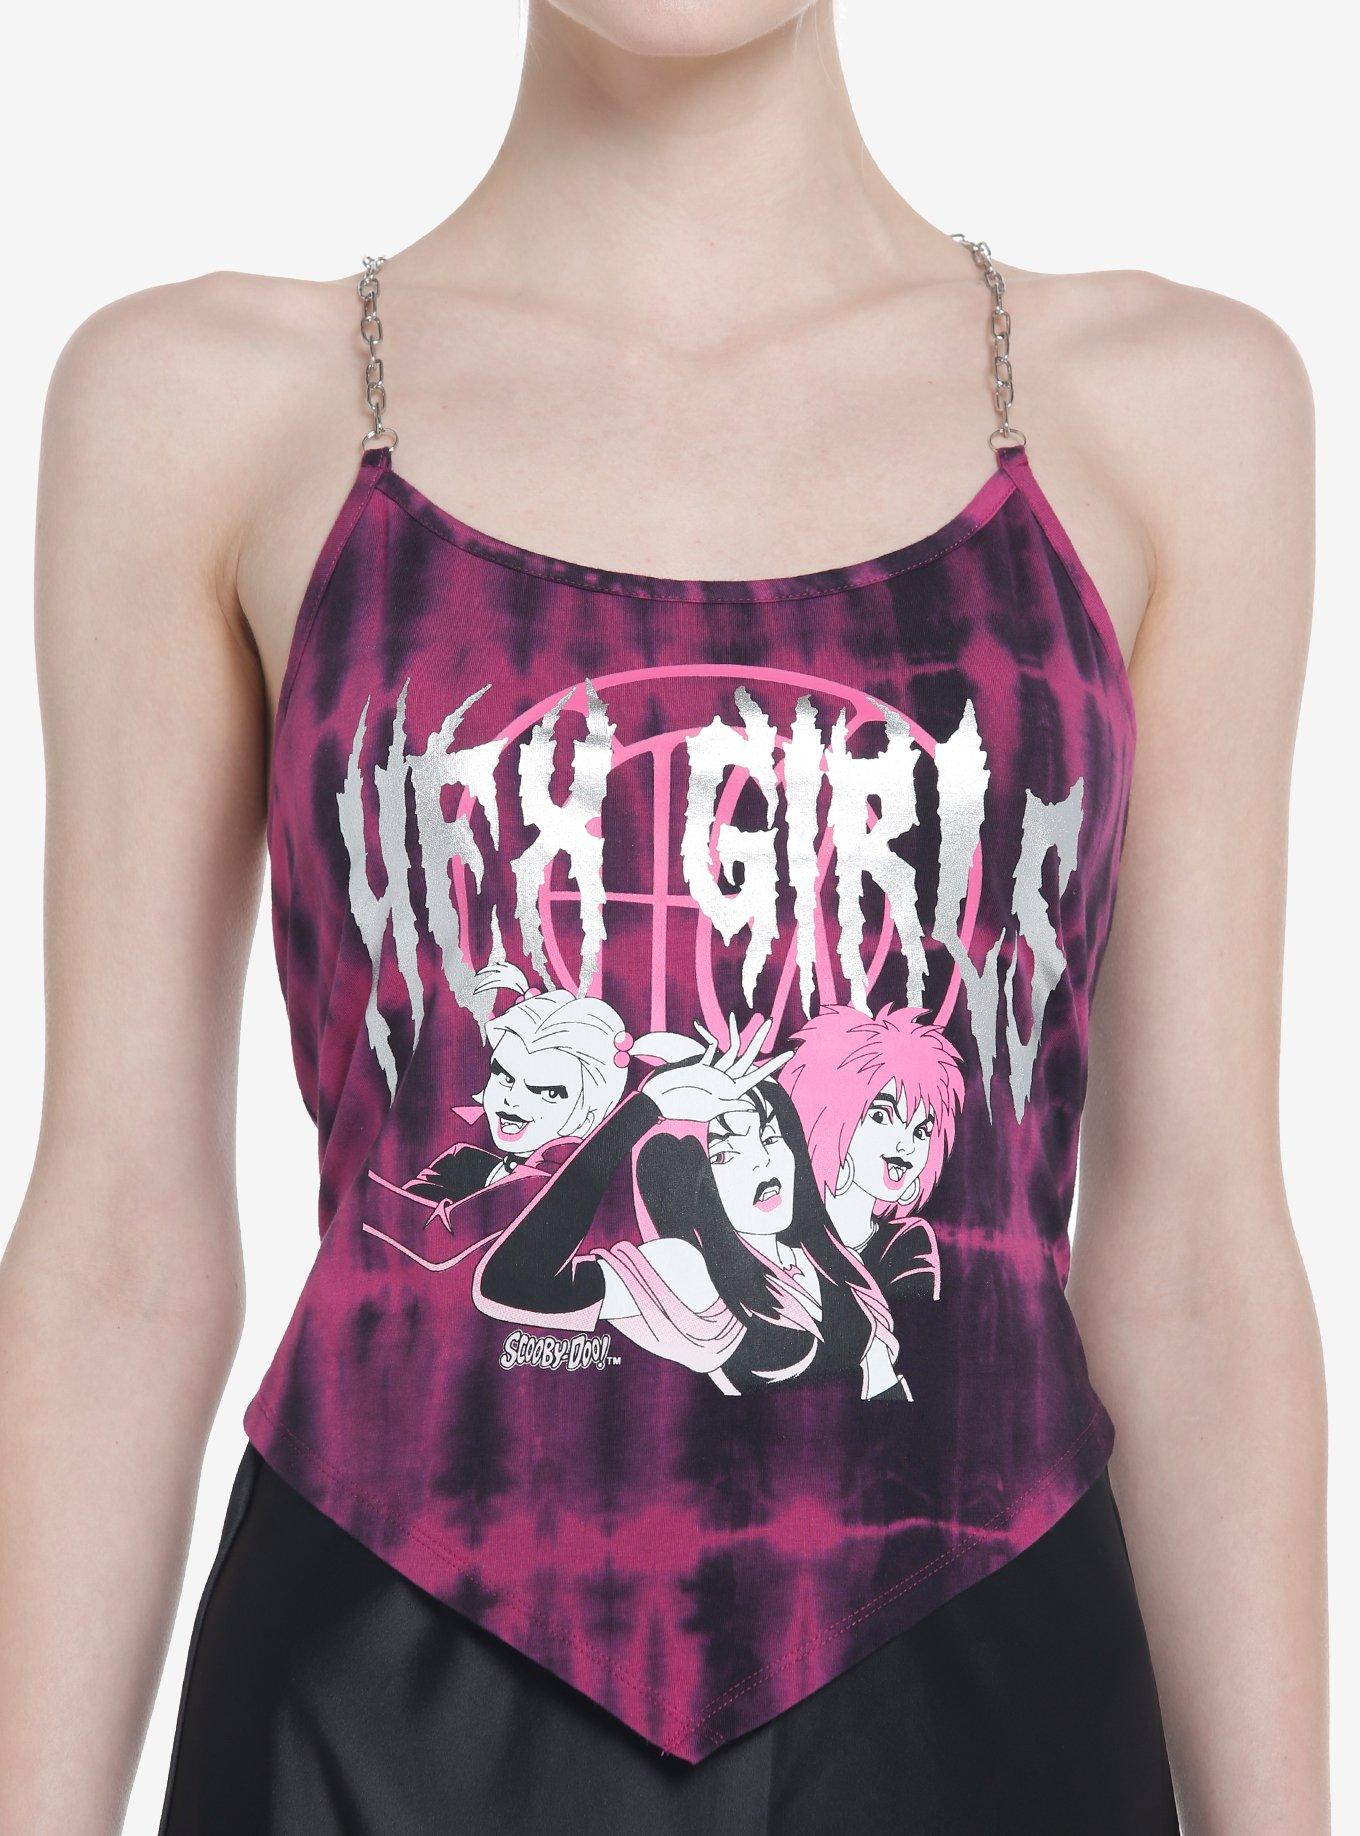 Scooby-Doo! The Hex Girls Chain Strap Girls Cami, MULTI, hi-res